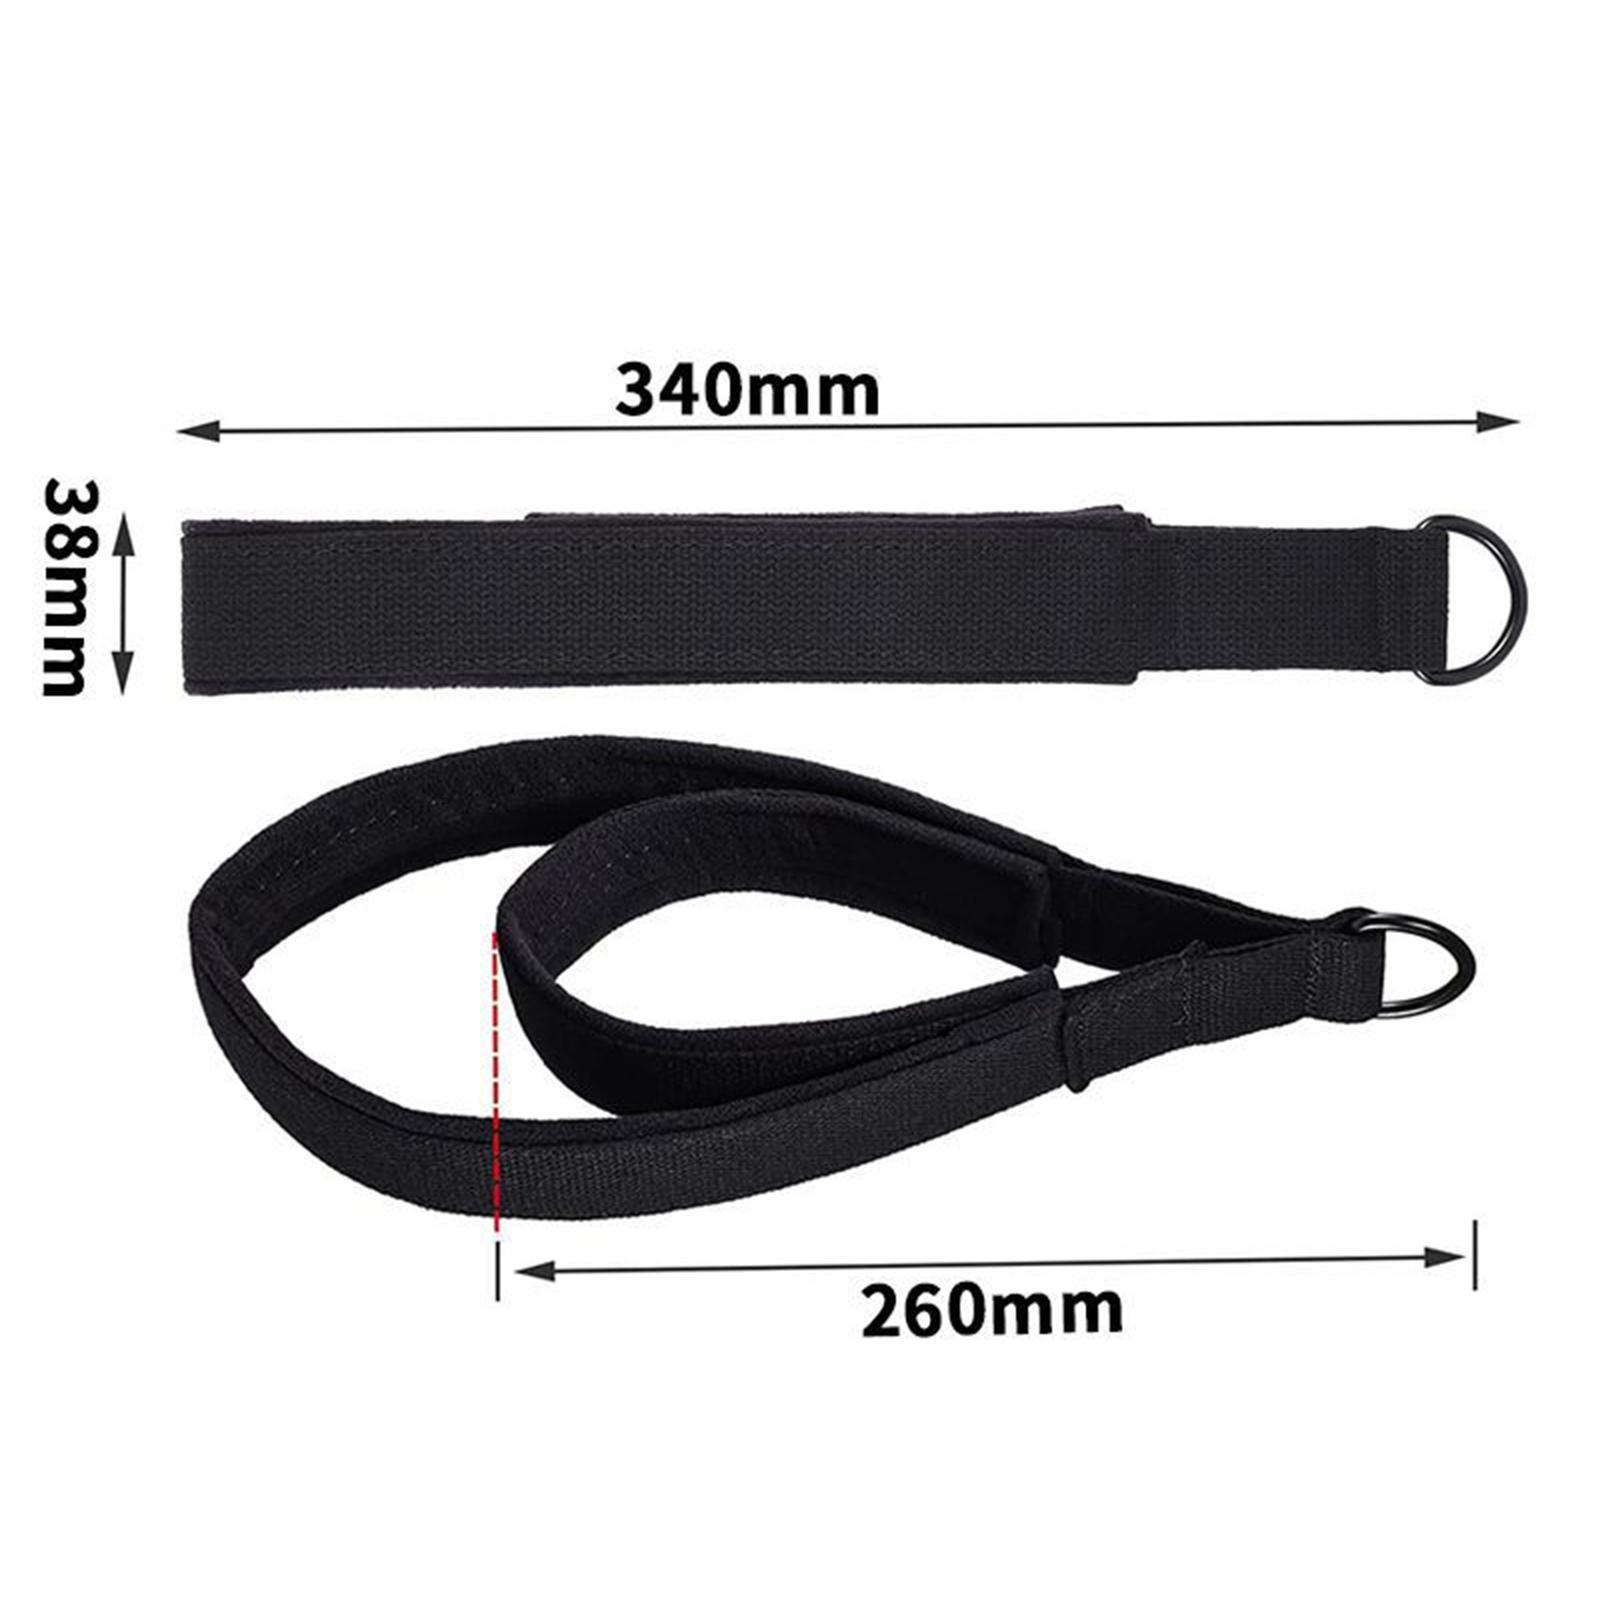 Pilates Straps Fitness Exercise Pilates Double Loop Straps for Home Gymnastics Beginner